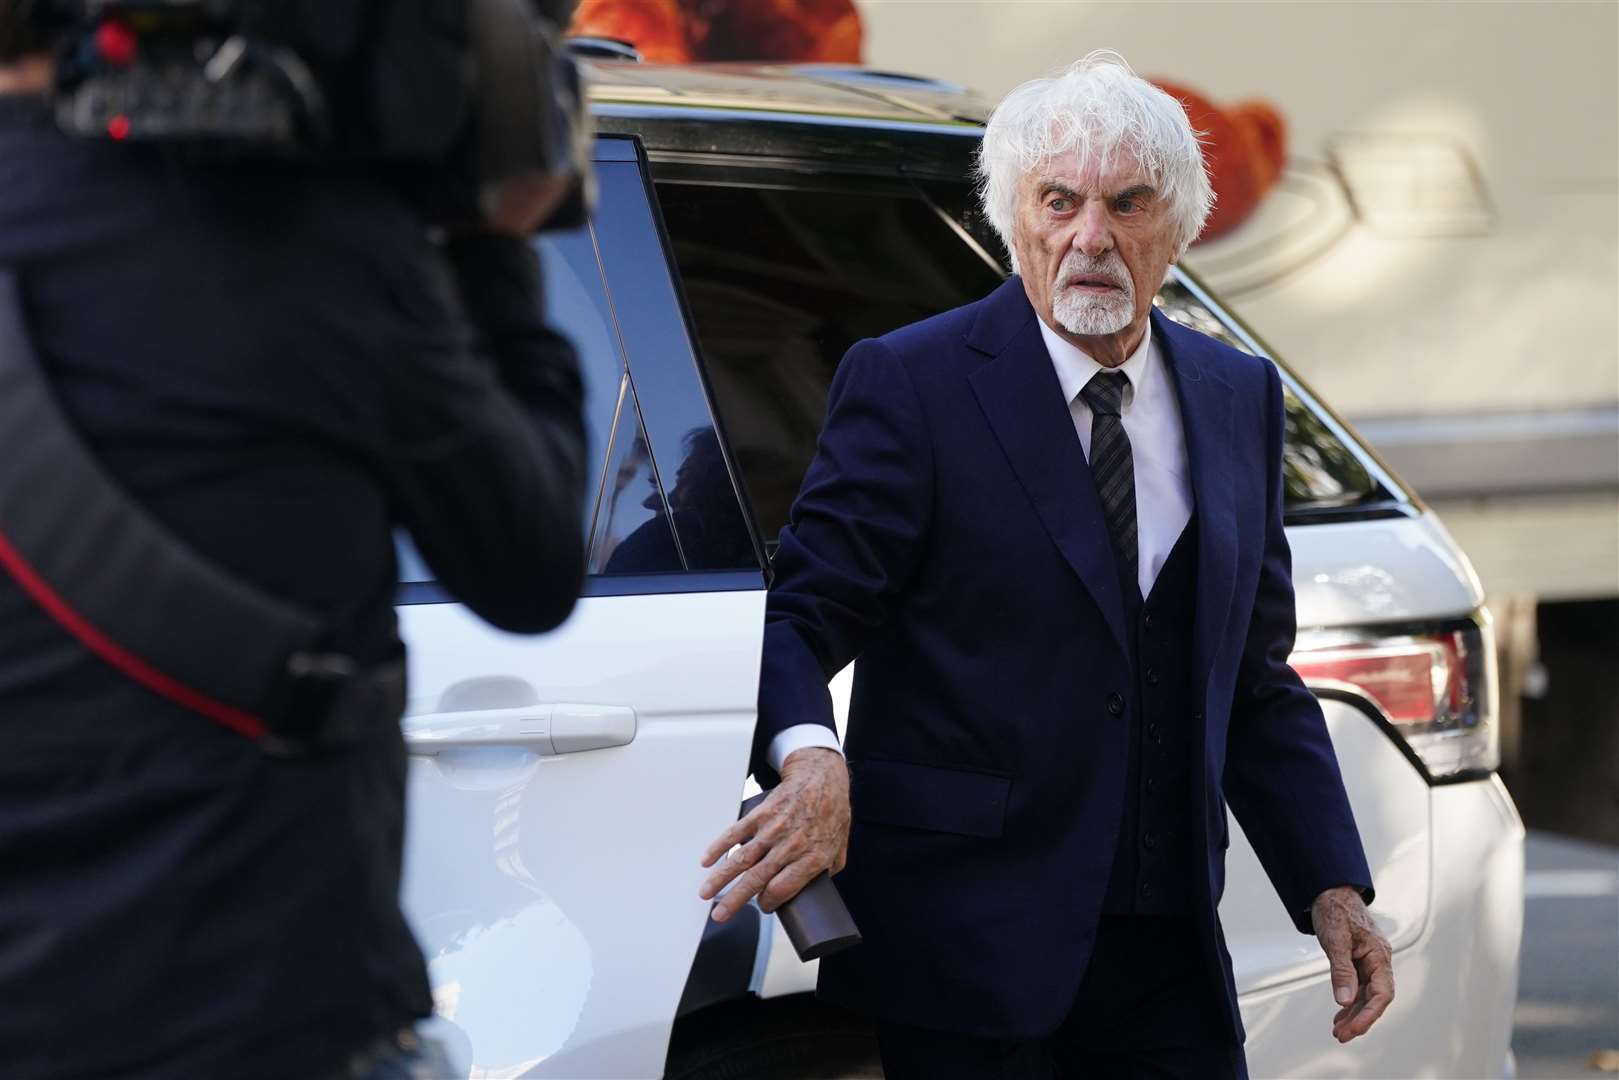 Former Formula One boss Bernie Ecclestone arrived at Westminster Magistrates’ Court in a white Range Rover (Victoria Jones/PA)